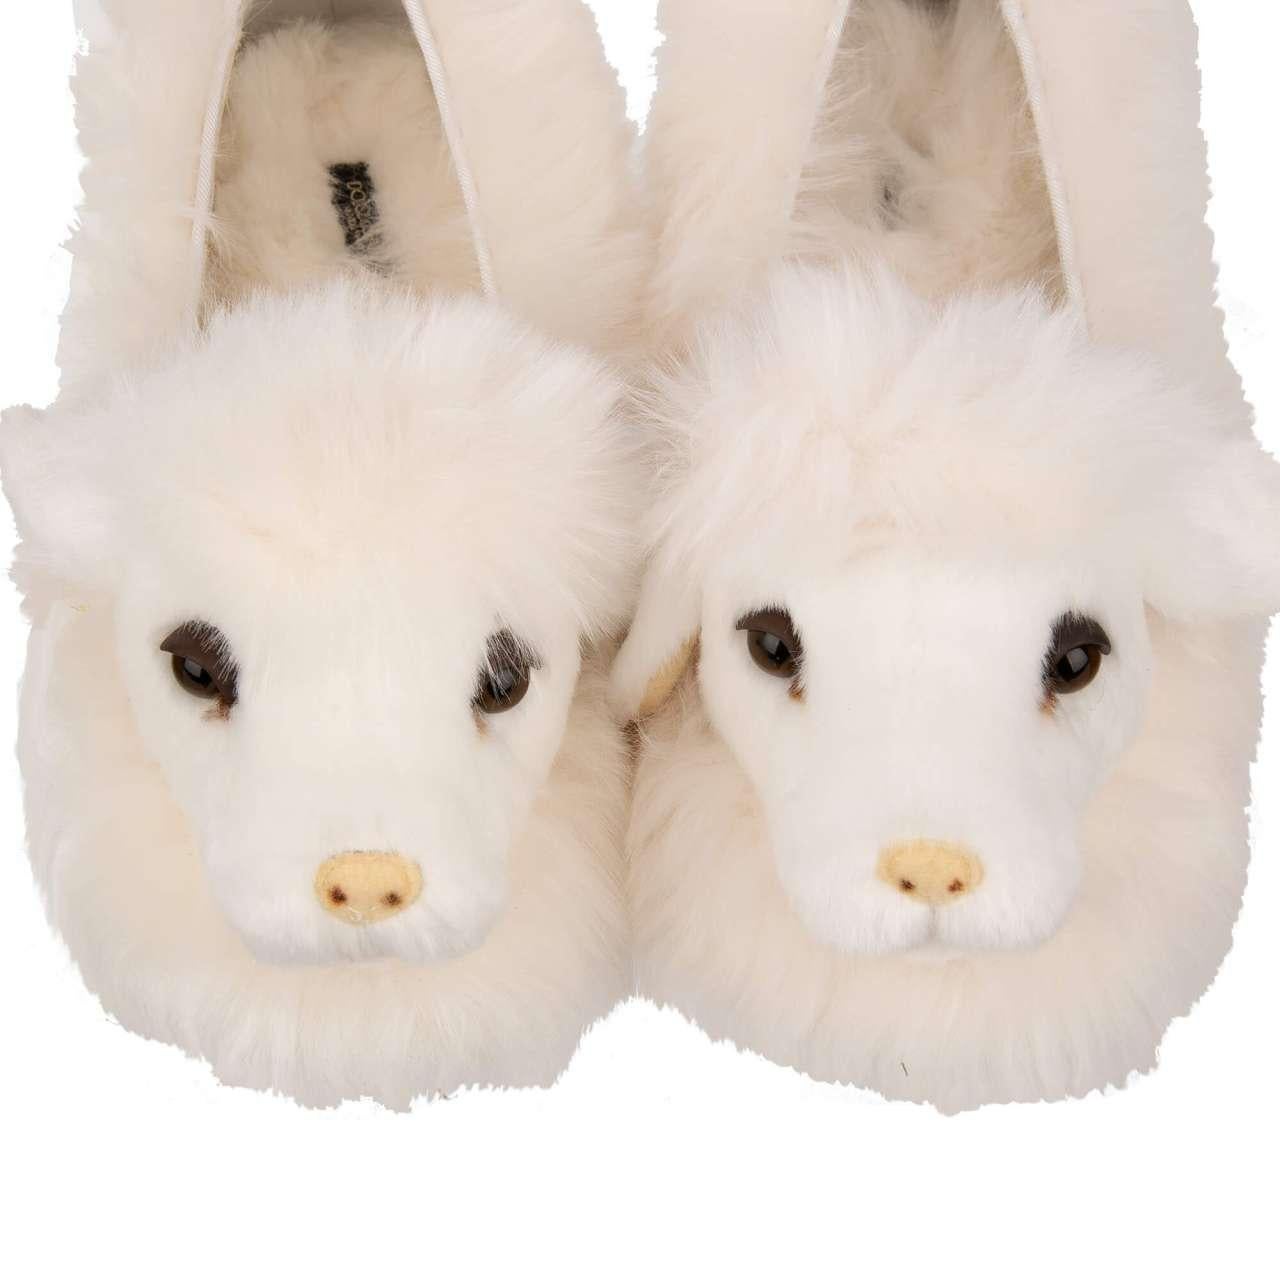 Dolce & Gabbana - Sheep Toy Eco Faux Fur Ballet Flats VALLY White 39.9 In Excellent Condition For Sale In Erkrath, DE